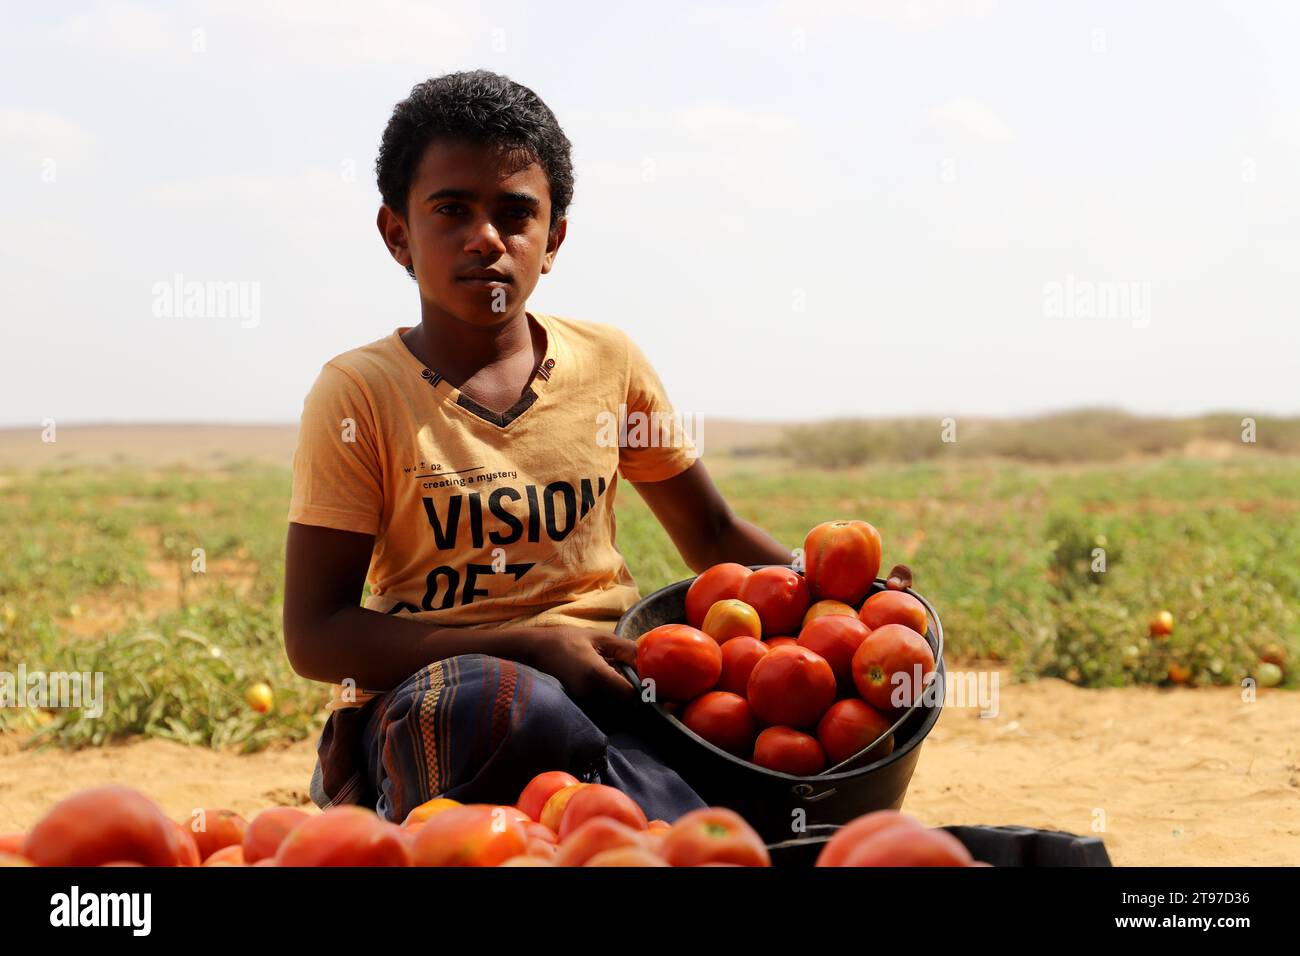 HAJJAH , YEMEN – February 28, 2021: War and siege stop hundreds of farms from producing amid the accumulation and damage of crops in northwestern Yeme Stock Photo